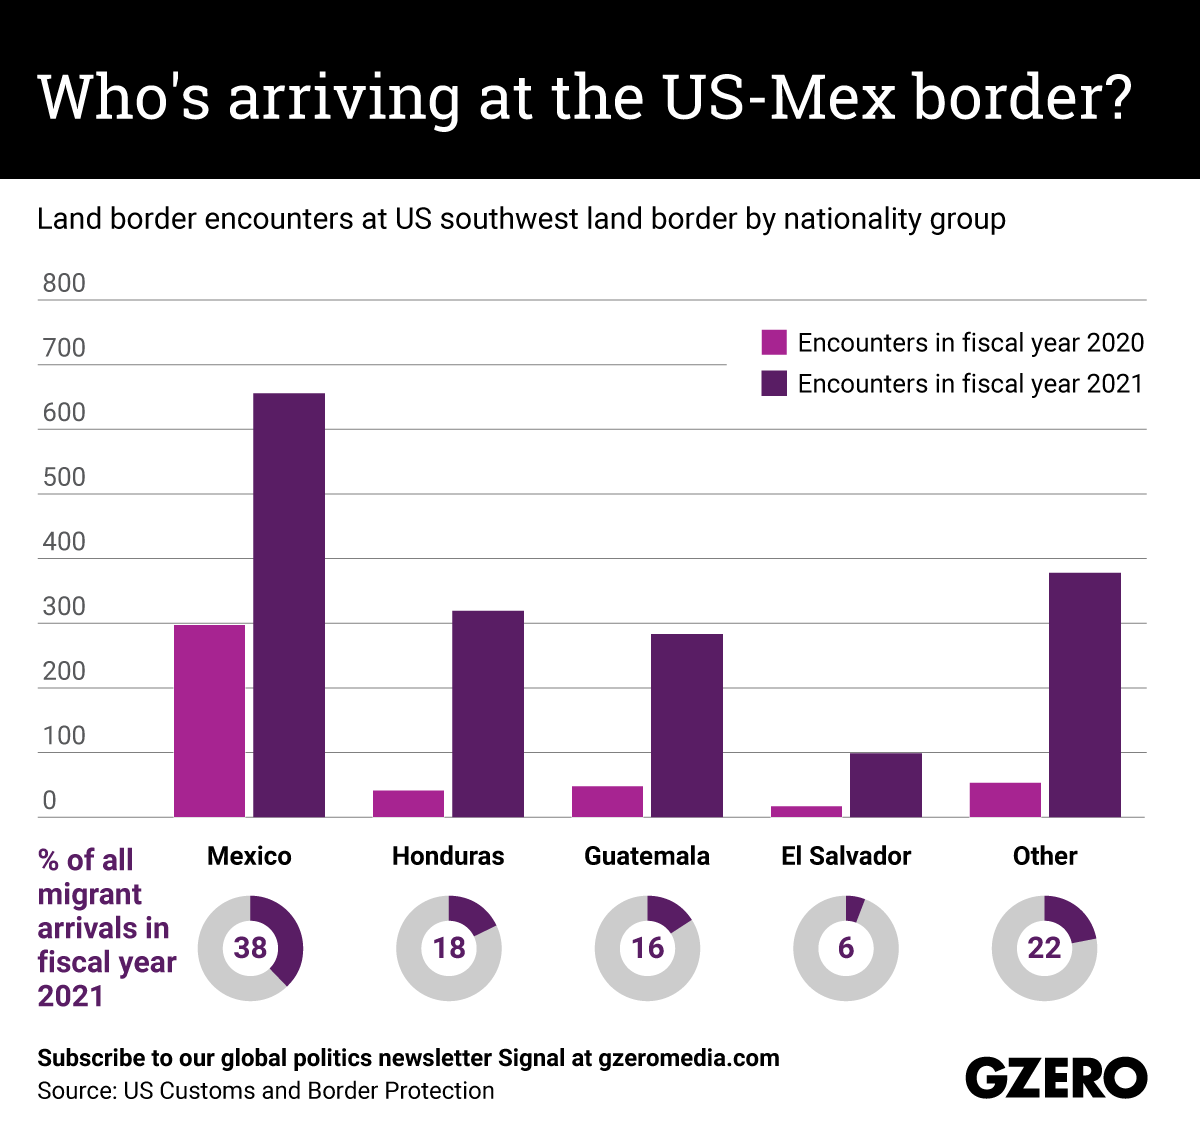 The Graphic Truth: Who's arriving at the US-Mex border